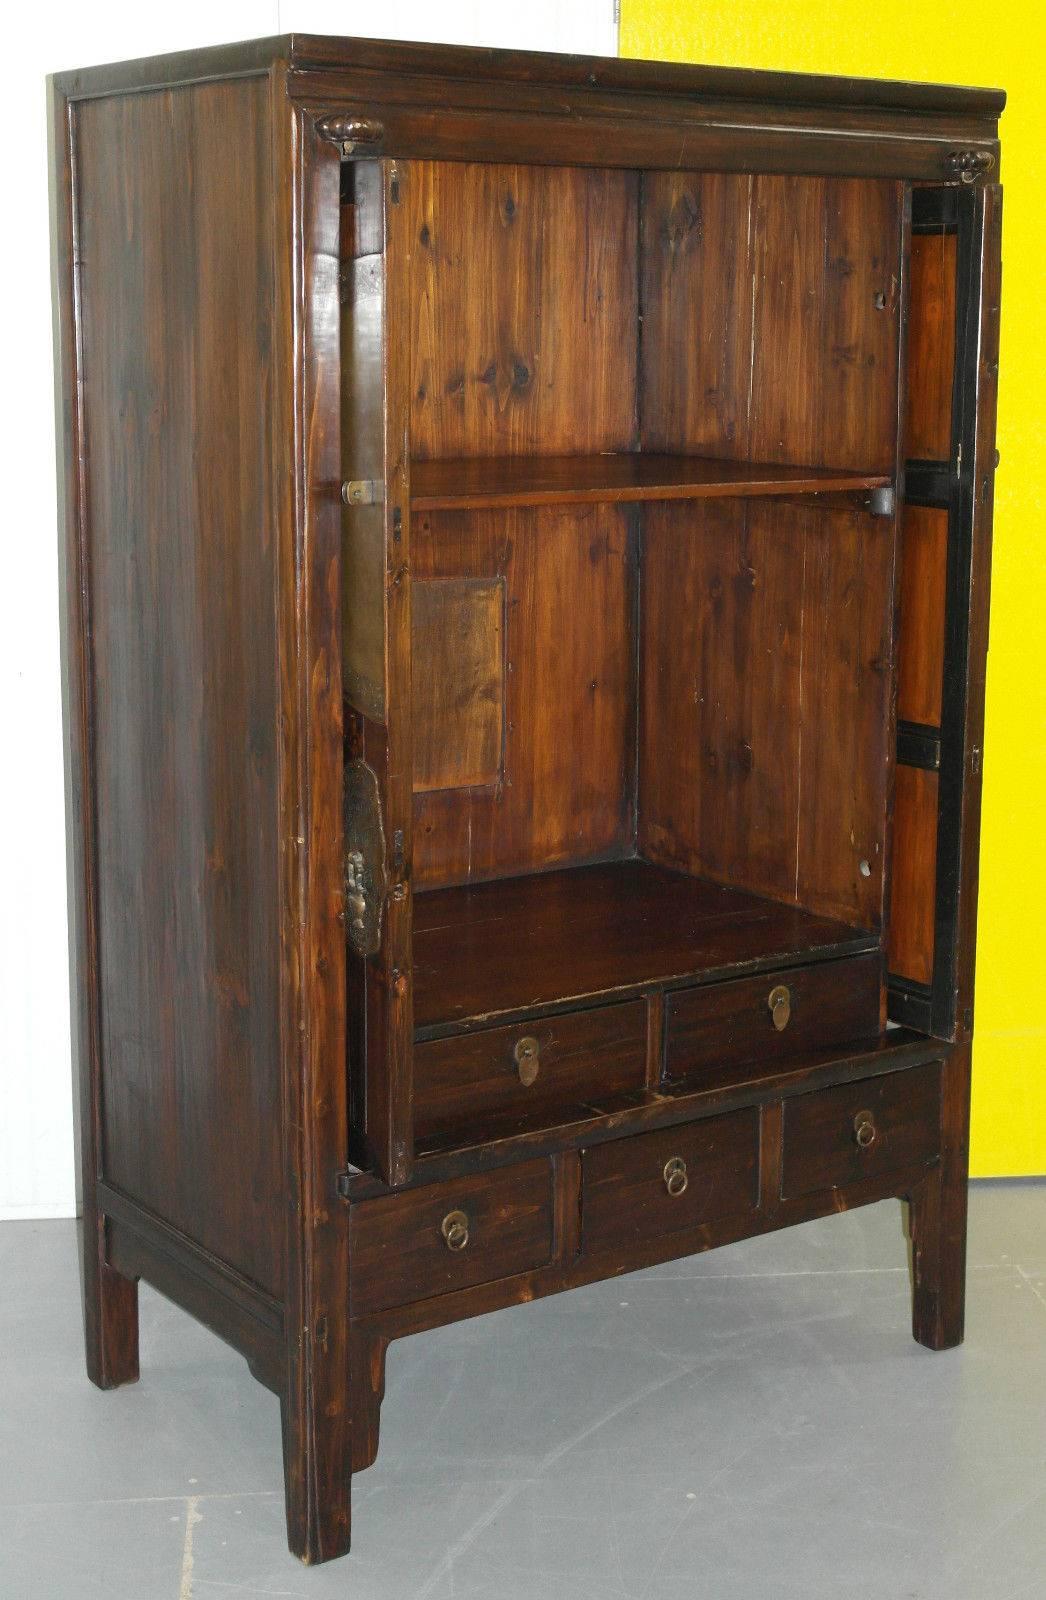 We are delighted to offer for sale this stunning Chinese Ming style entertainment unit made from solid elmwood with retractable doors

The basic model in this range costs £1350 without the retractable doors or internal drawers, this model is just